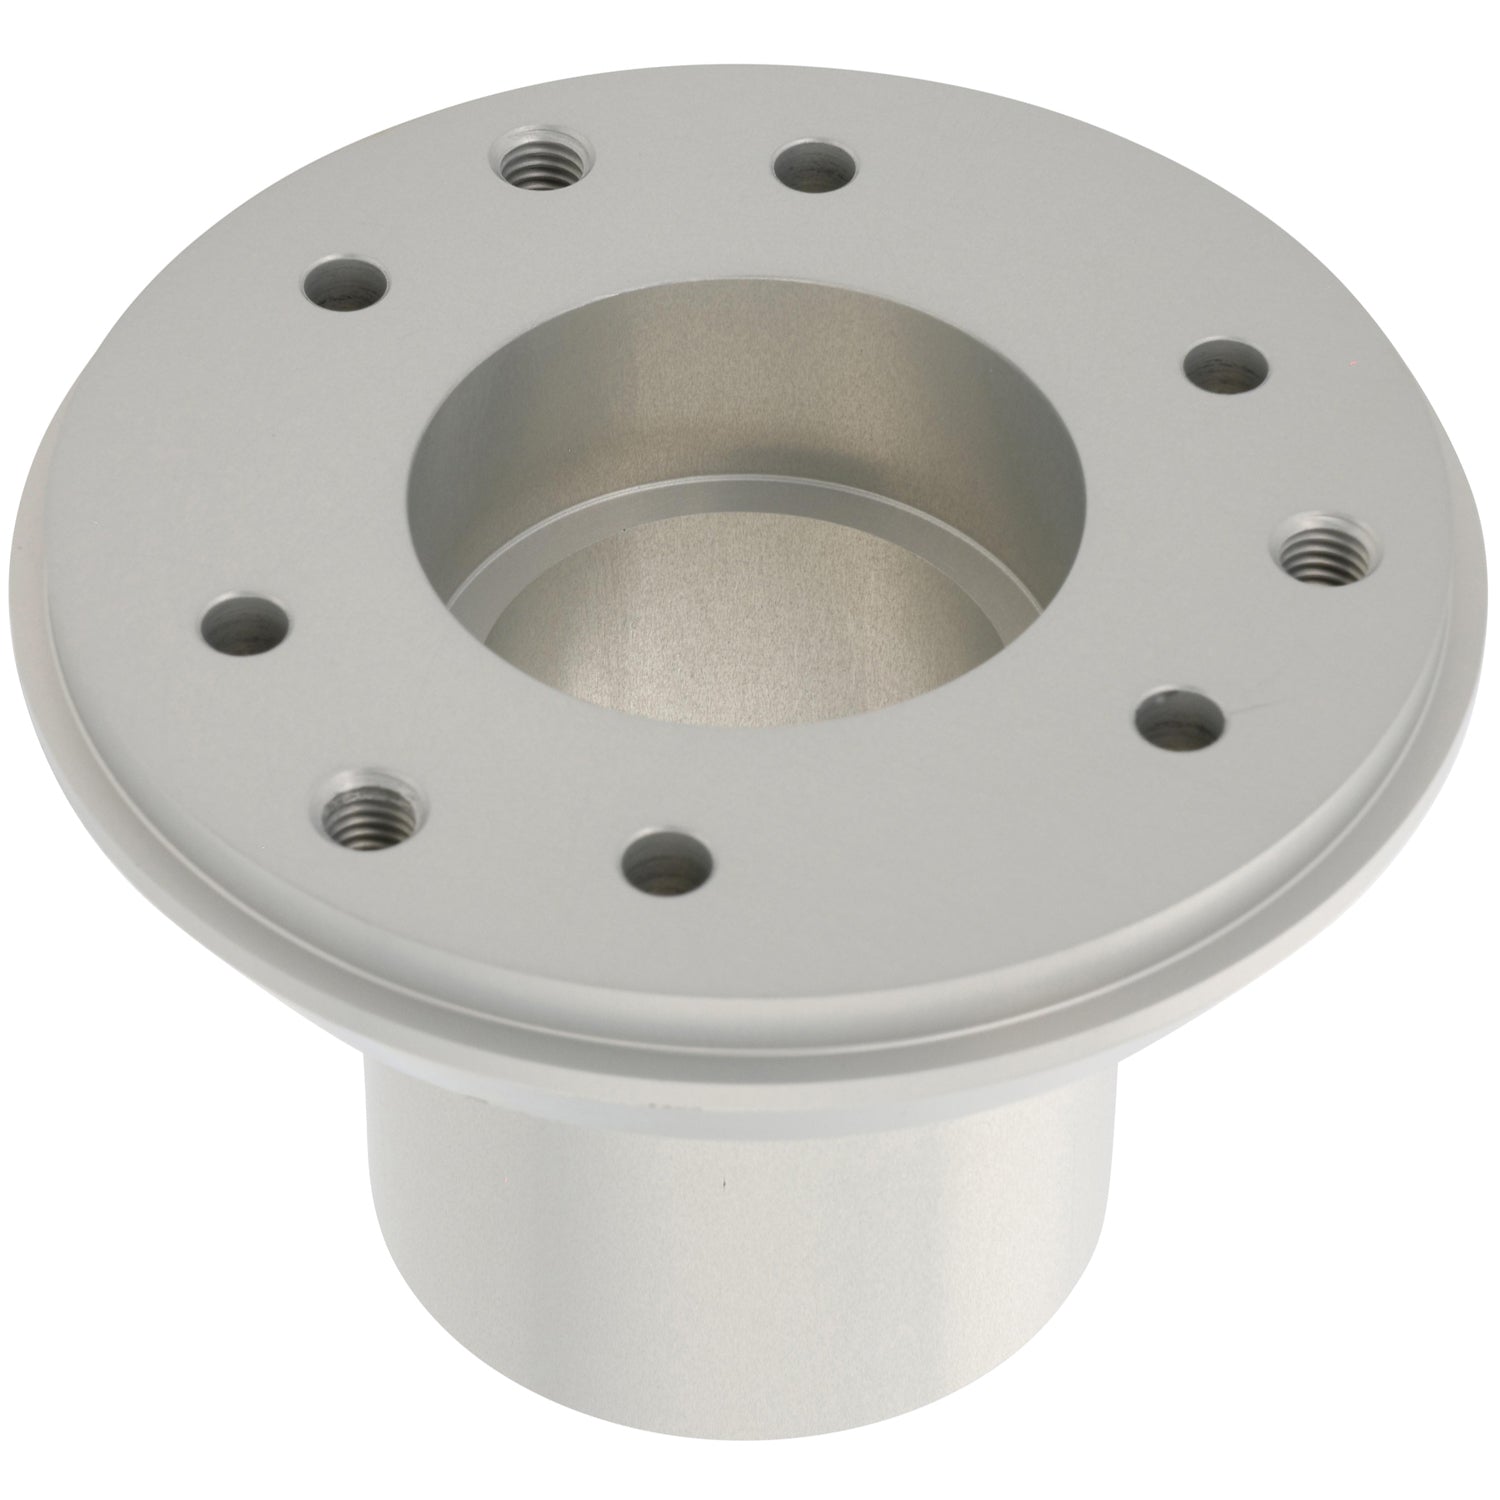 Aluminum bearing carrier with multiple threaded mounting holes shown on white background. 